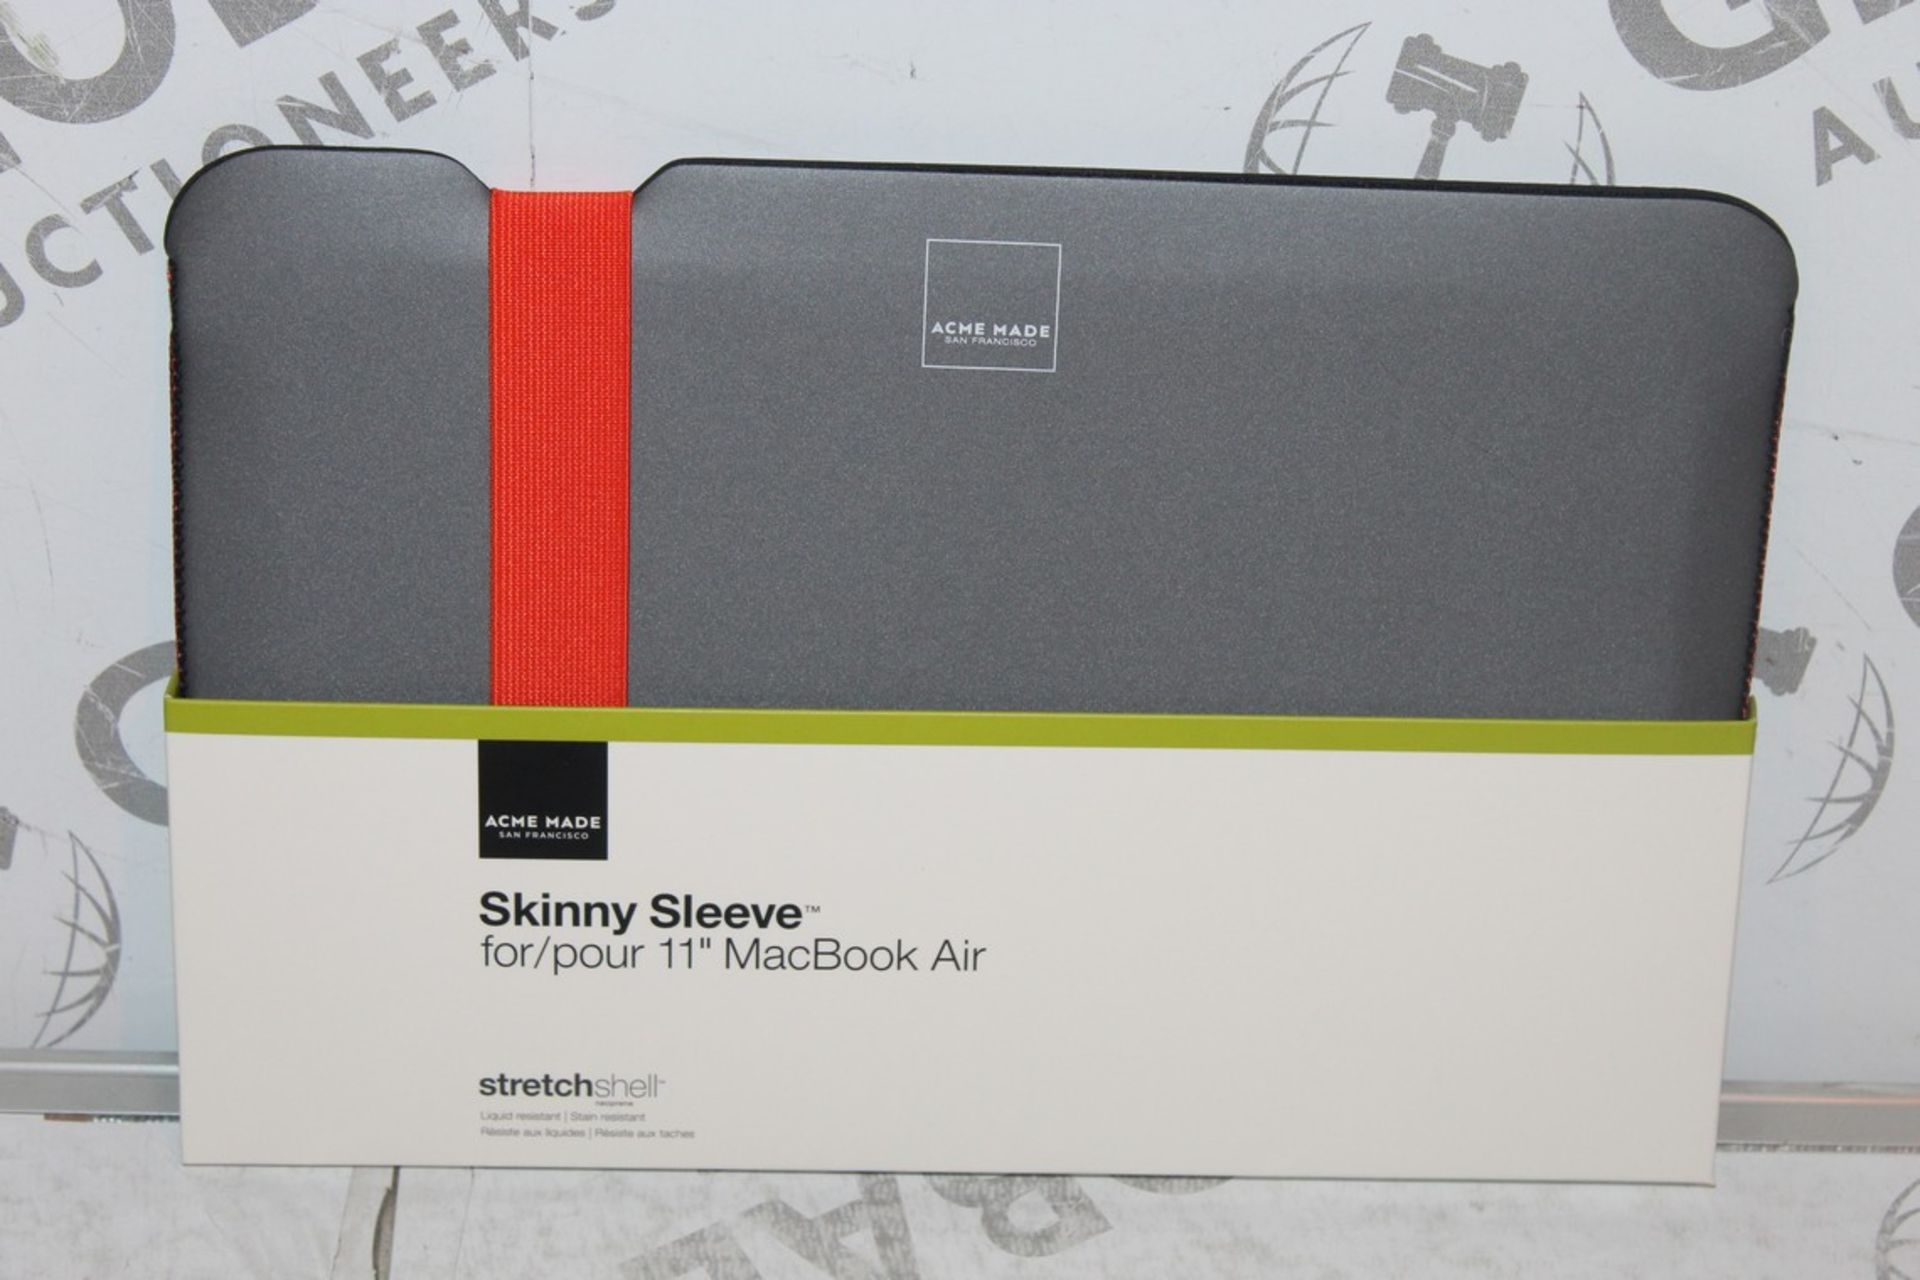 Lot to Contain 2 Brand New Acme Made Skinny Sleeve Cases for Macbook Air 11Inch Combined RRP £50